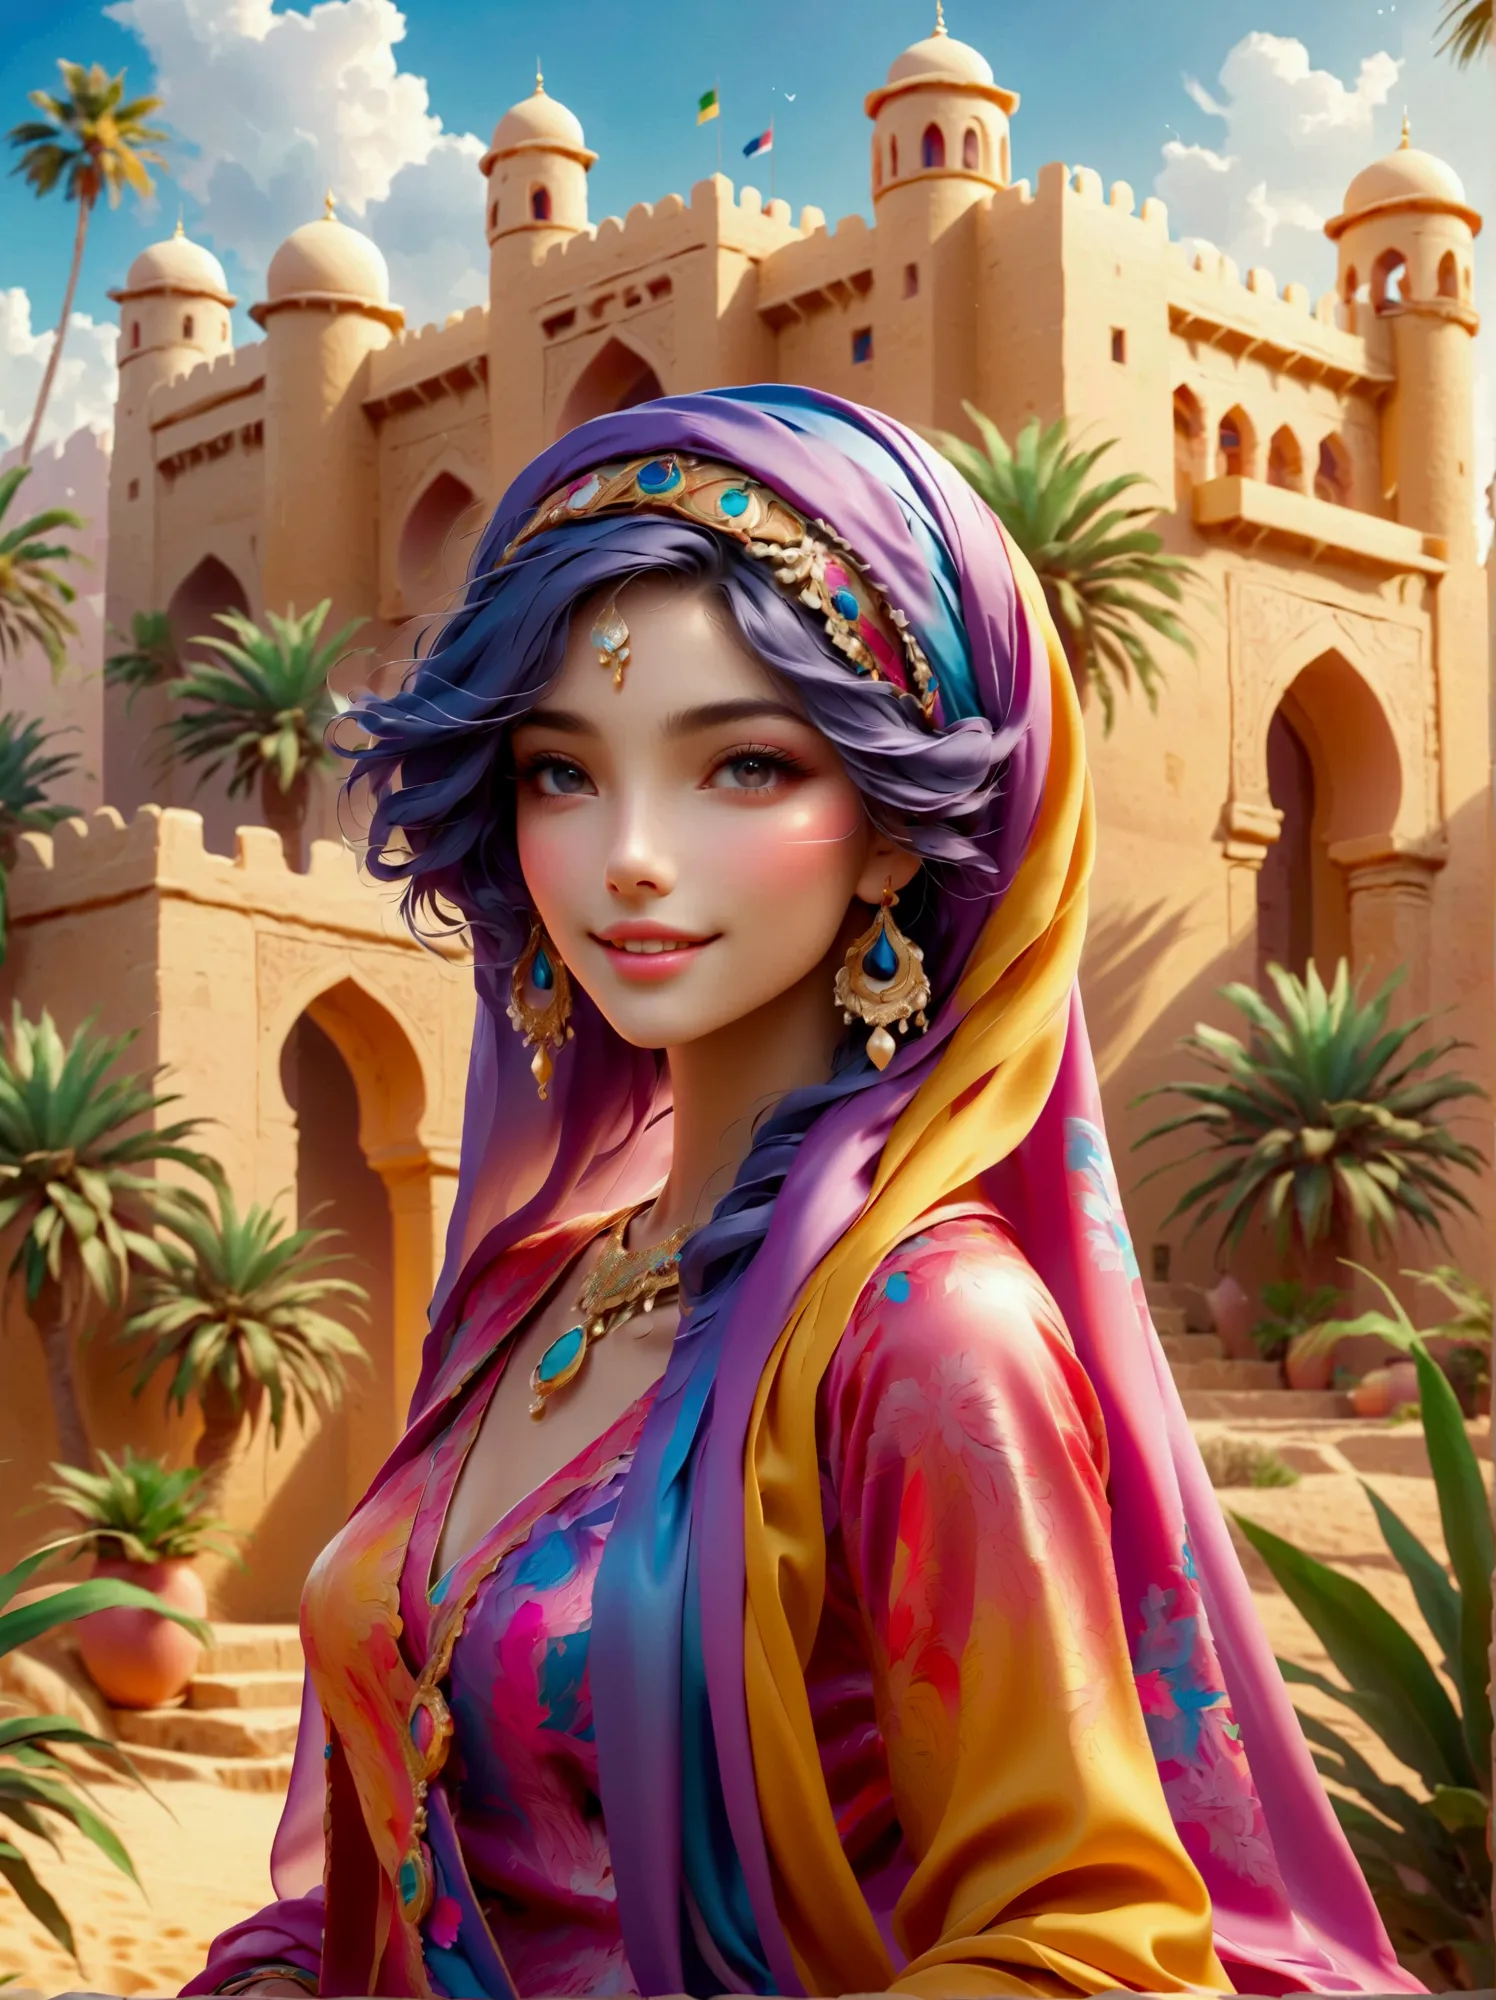 Desert Princess, Wear colorful traditional clothing, An atmosphere of magic and whimsy, Similar to the setting of an animation p...